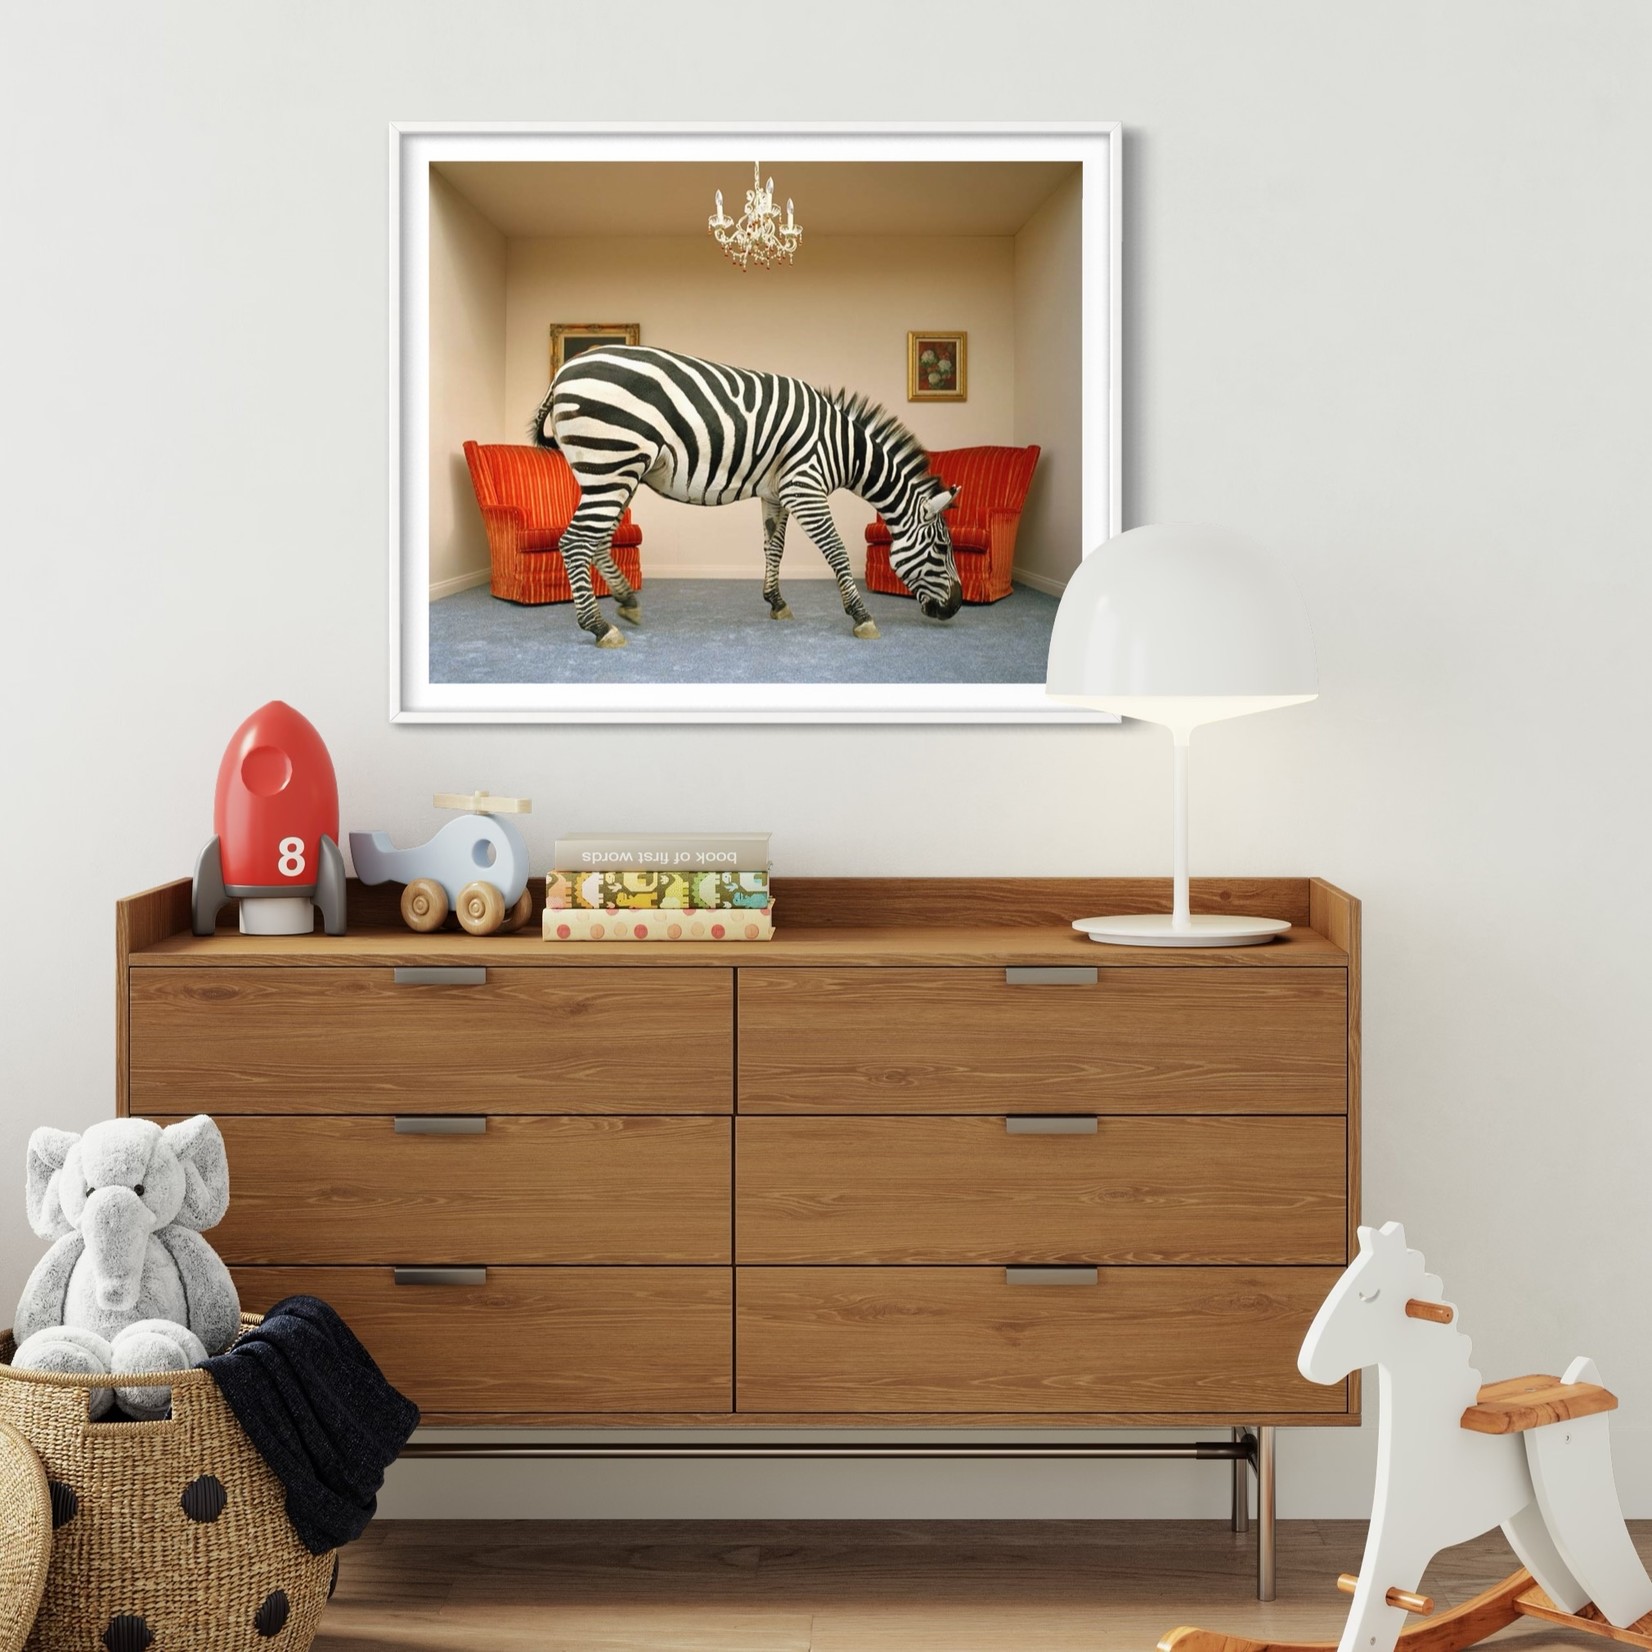 Getty Images Gallery Zebra in living room smelling rug by Matthias Clamer via Getty Images Gallery